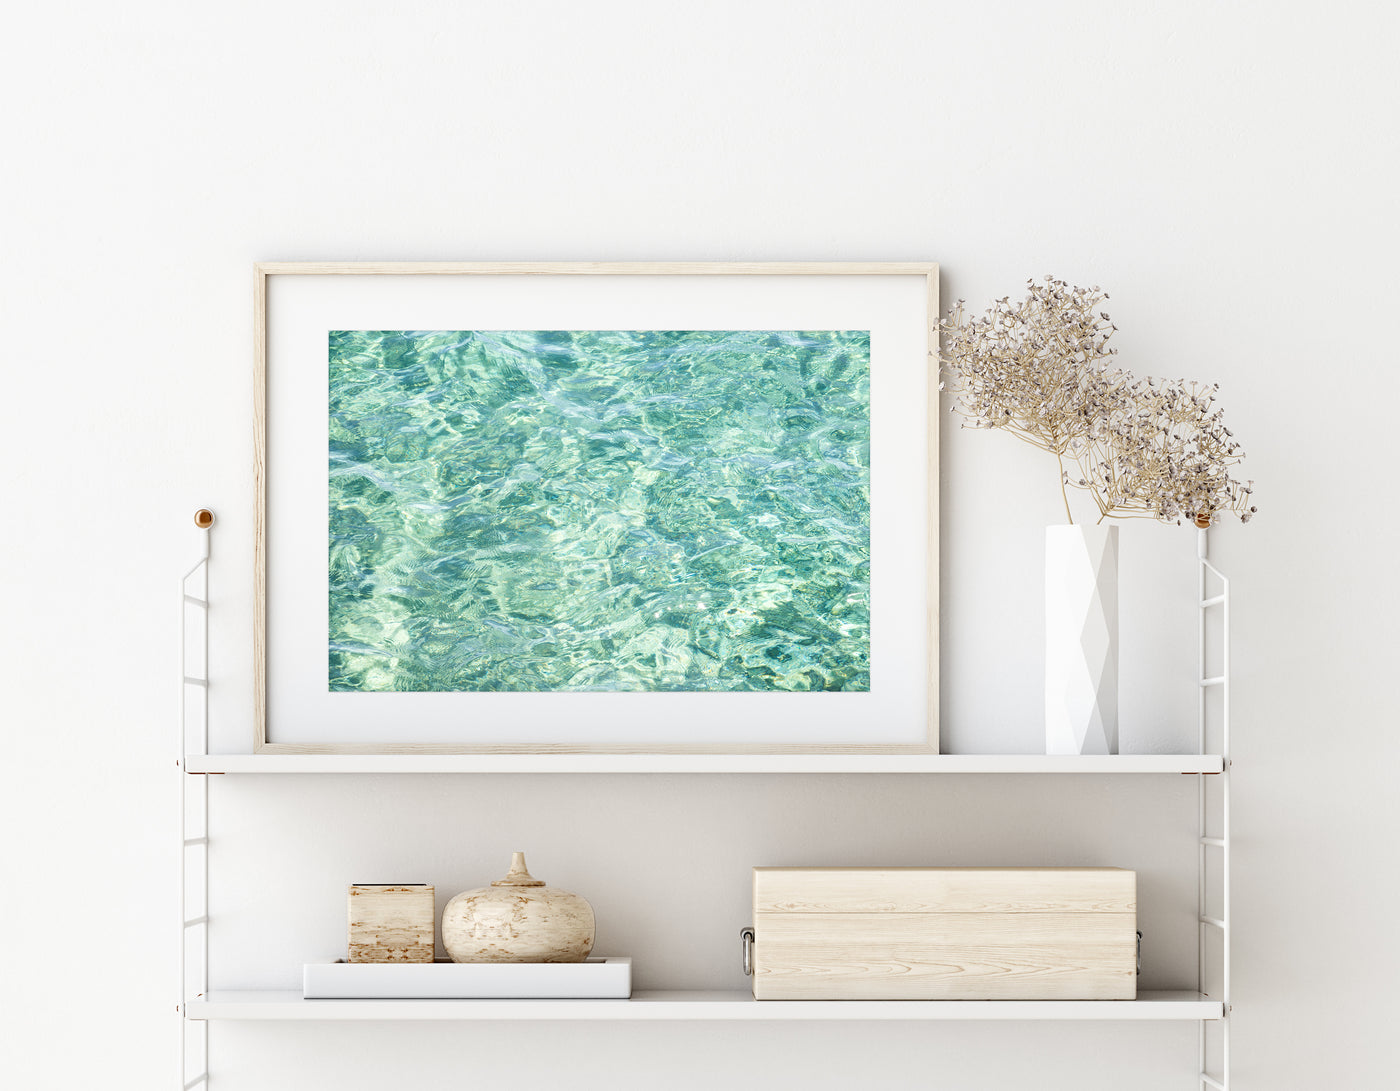 Framed green abstract art print by Cattie Coyle Photography on string shelf with neutral colored decor items